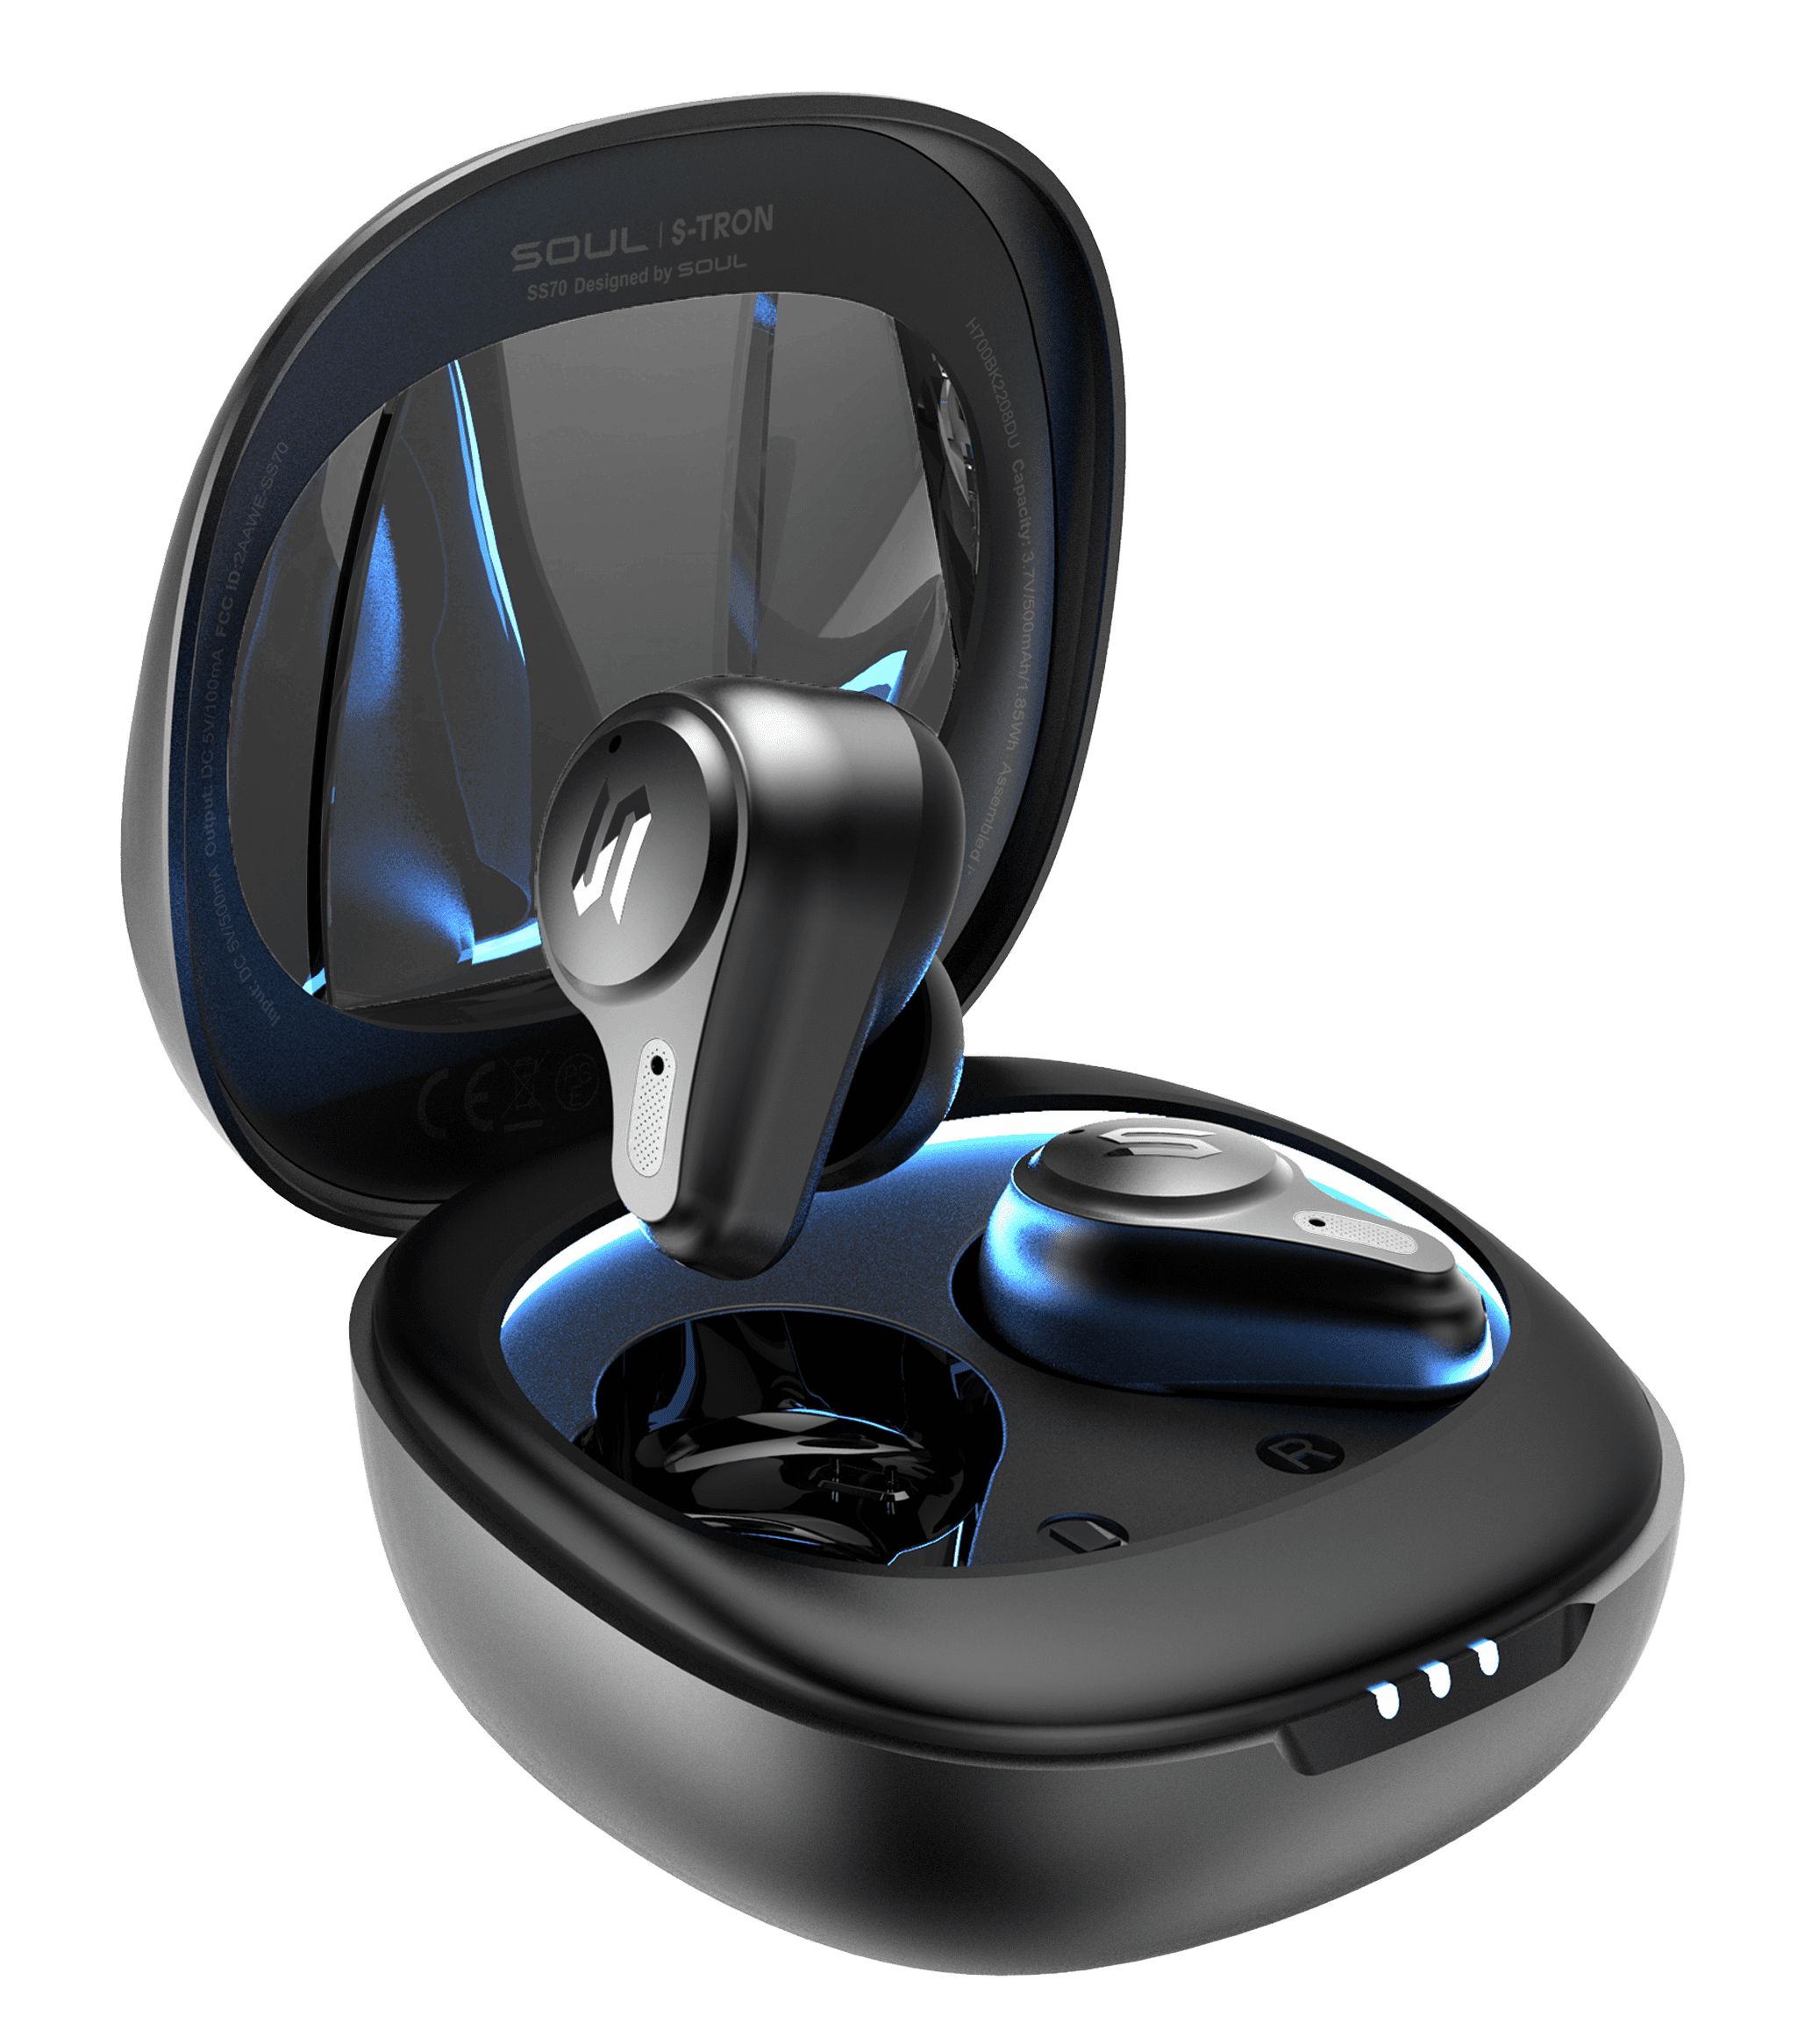 SOUL S-Tron True Wireless Earbuds with LED Light Ring (BLACK), , large image number 0